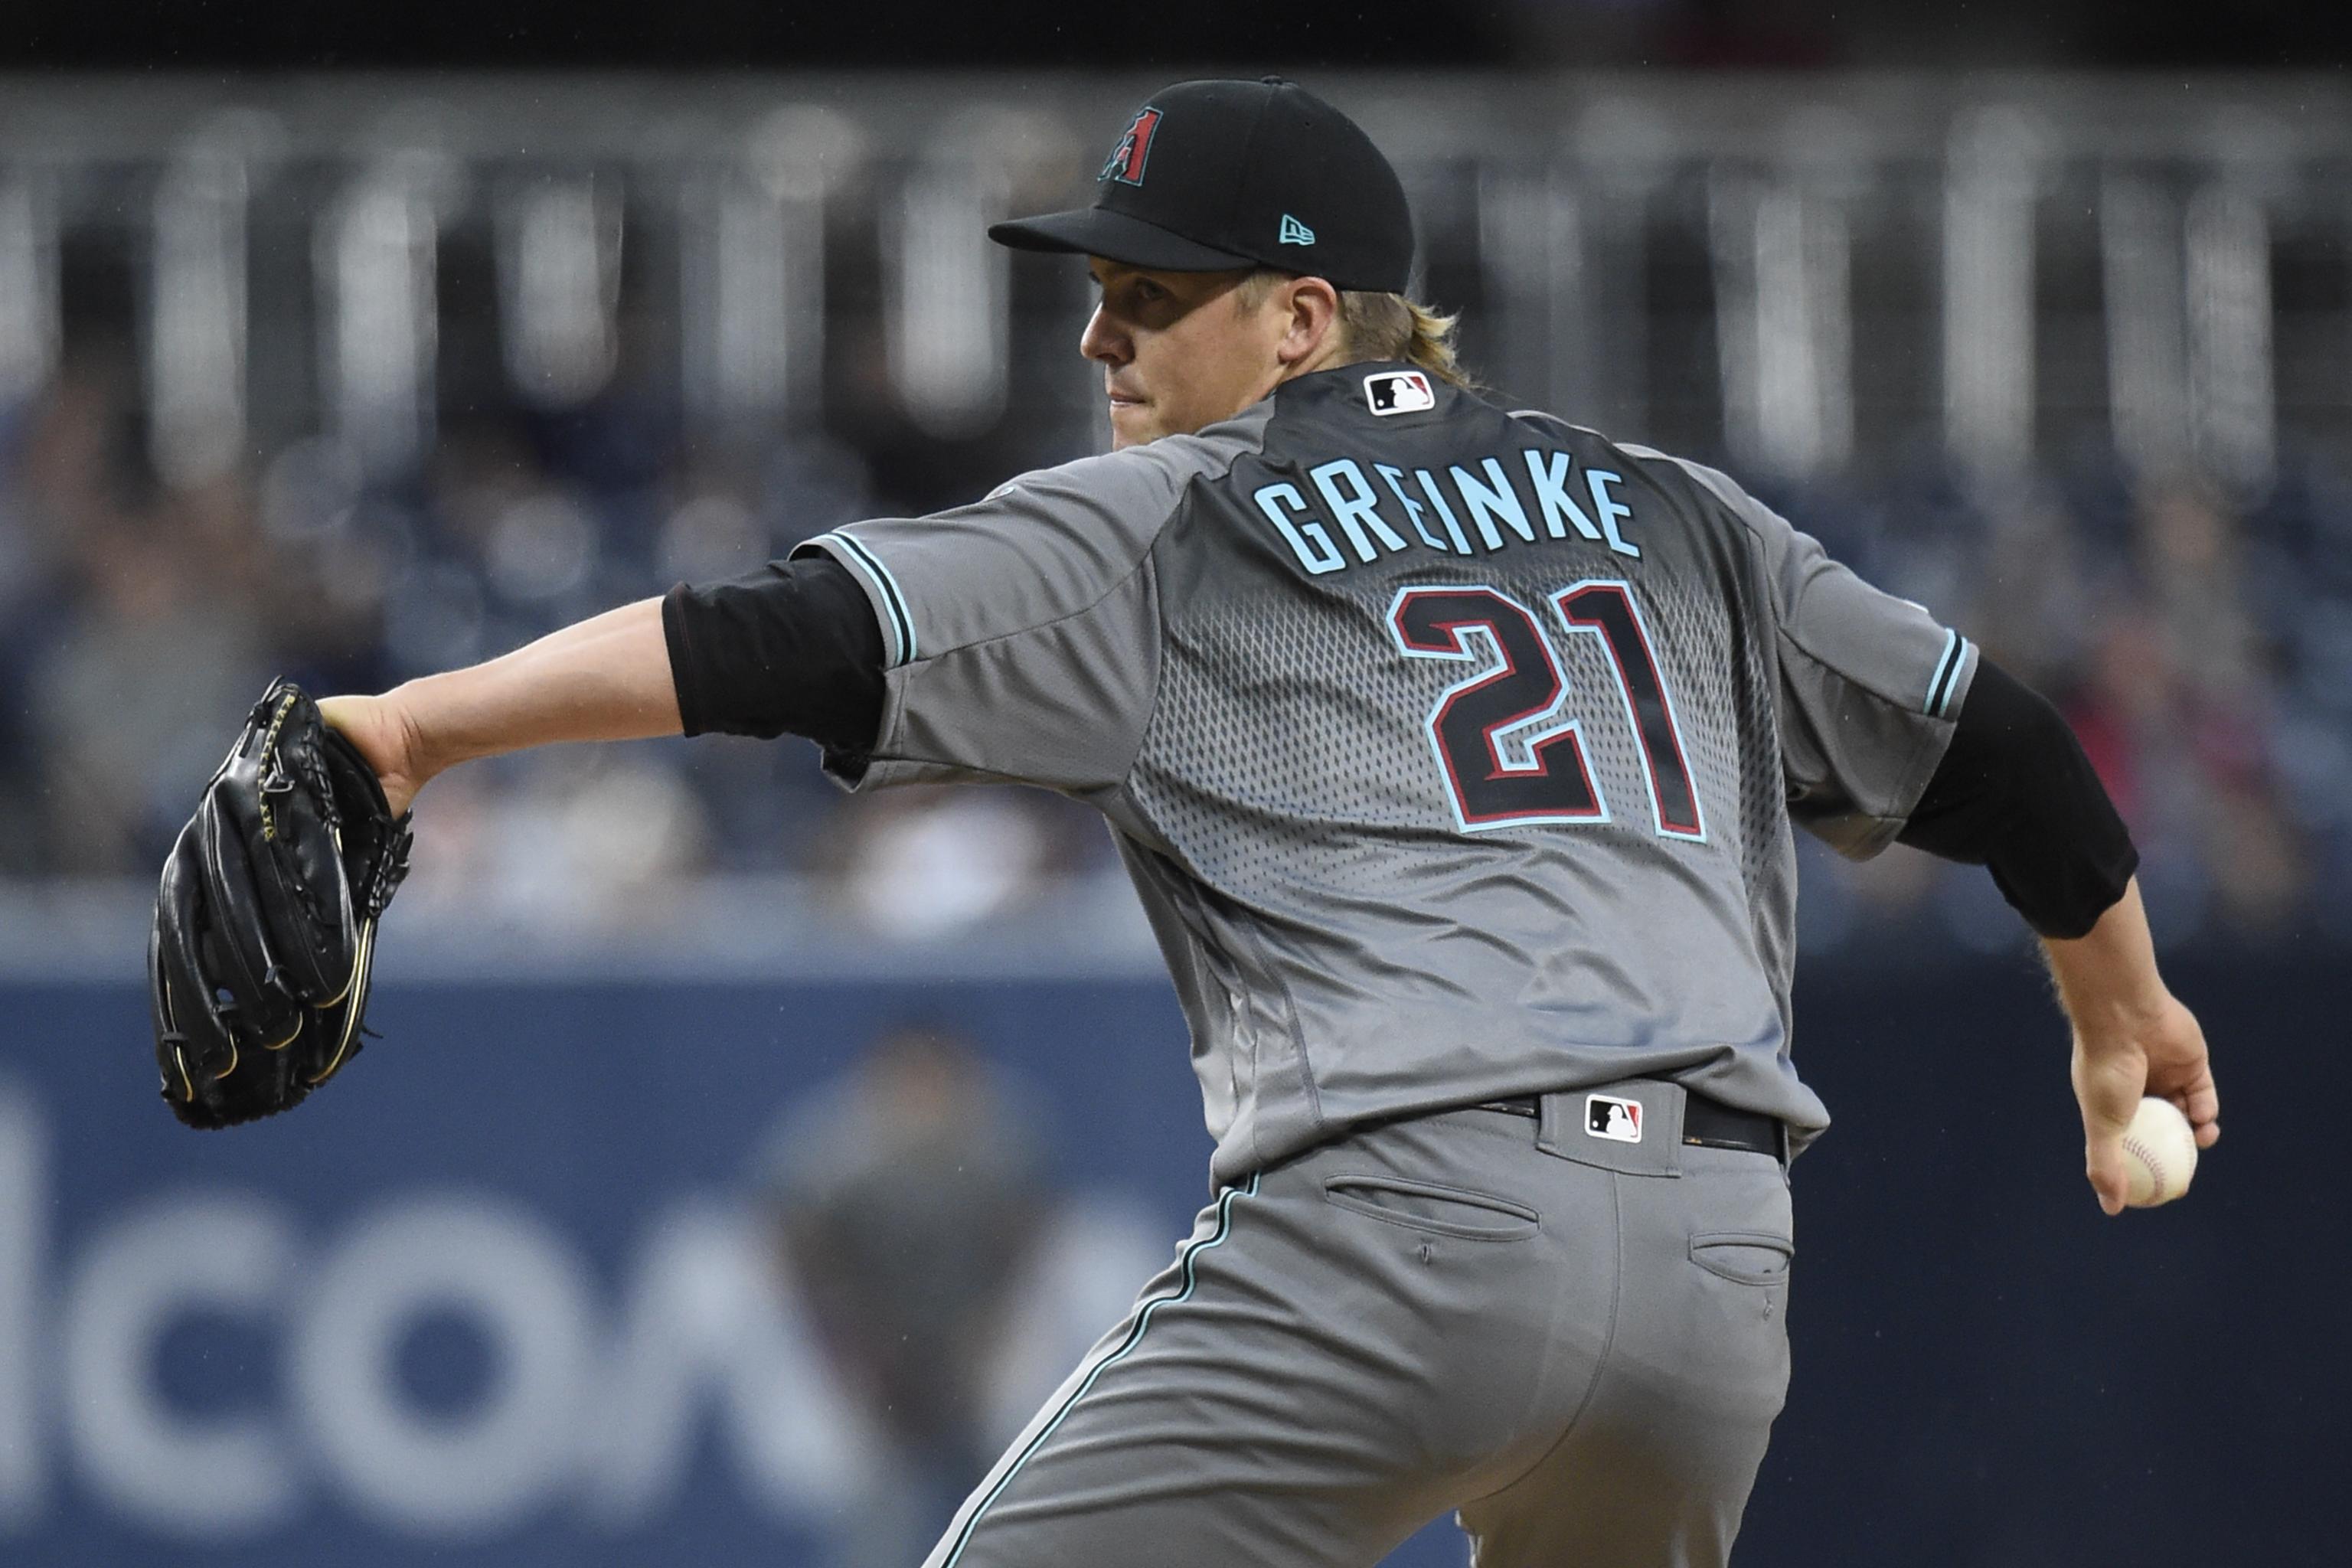 Astros to acquire former Cy Young Award winner Zack Greinke from